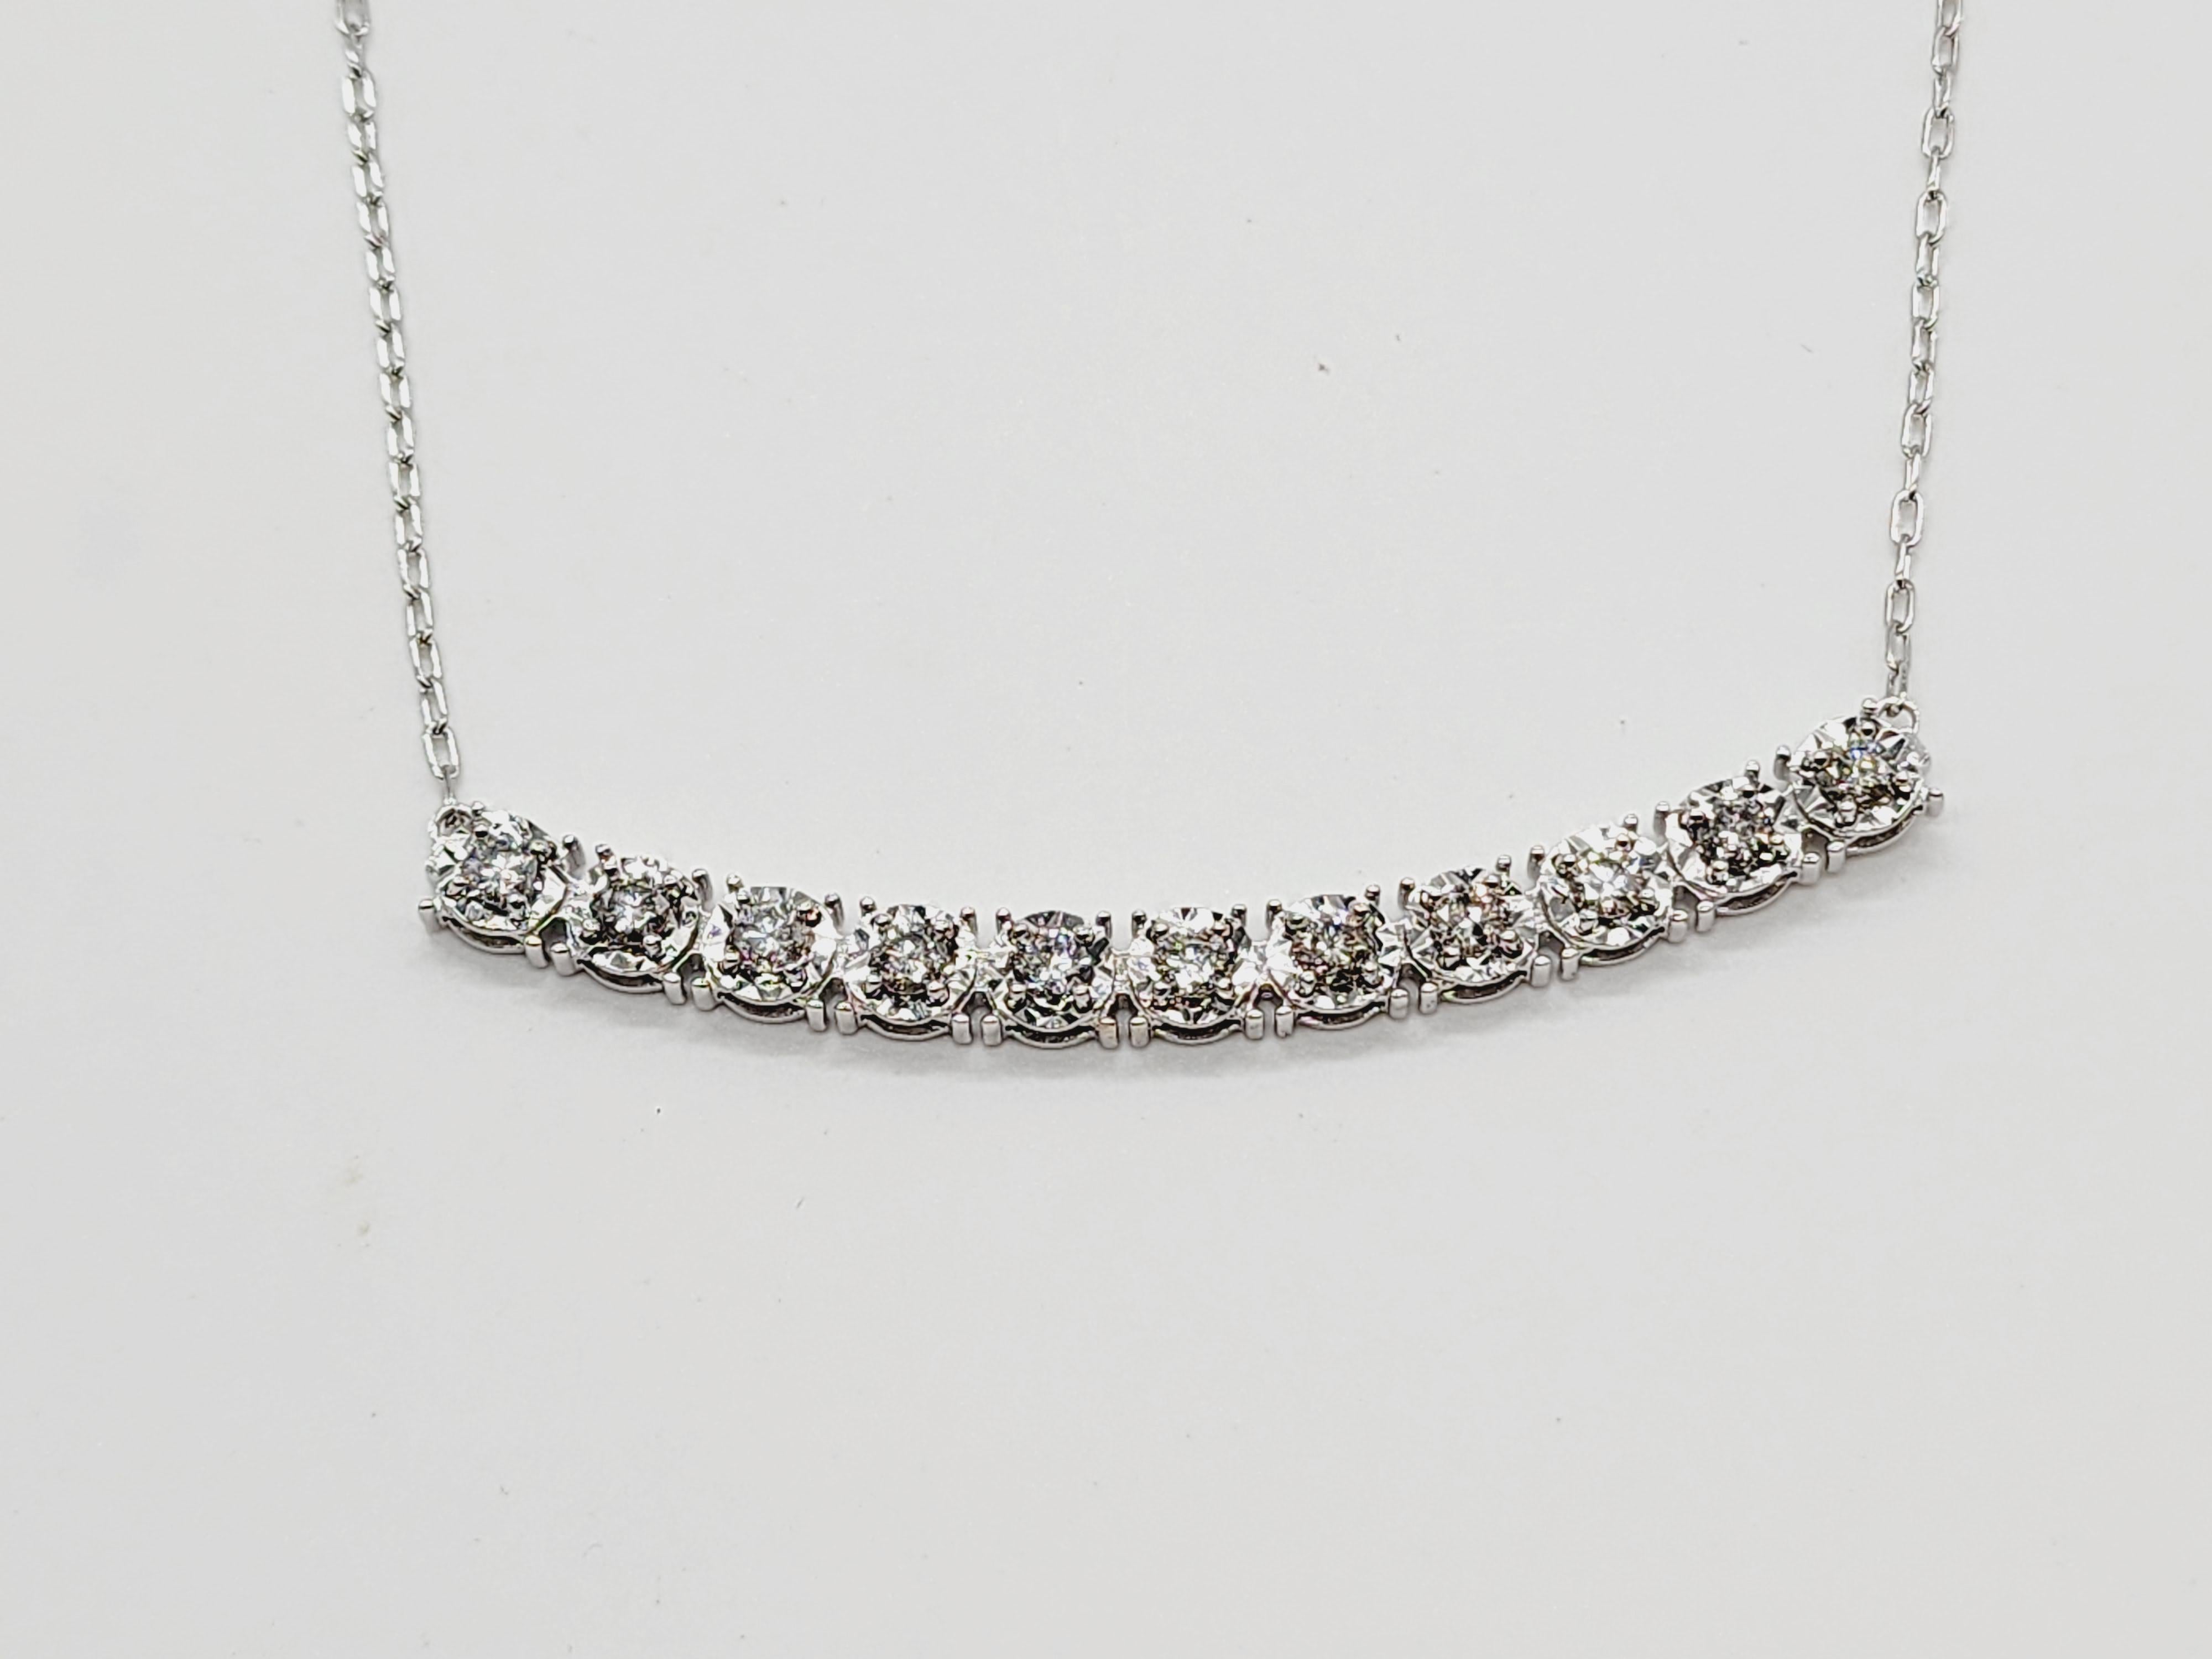 Brilliant and beautiful mini illusion setting necklace, natural round-brilliant cut white diamonds clean and Excellent shine. 14k White gold illusion setting four-prong for maximum light brilliance.
18 inch length. Average J Color, SI Clarity.